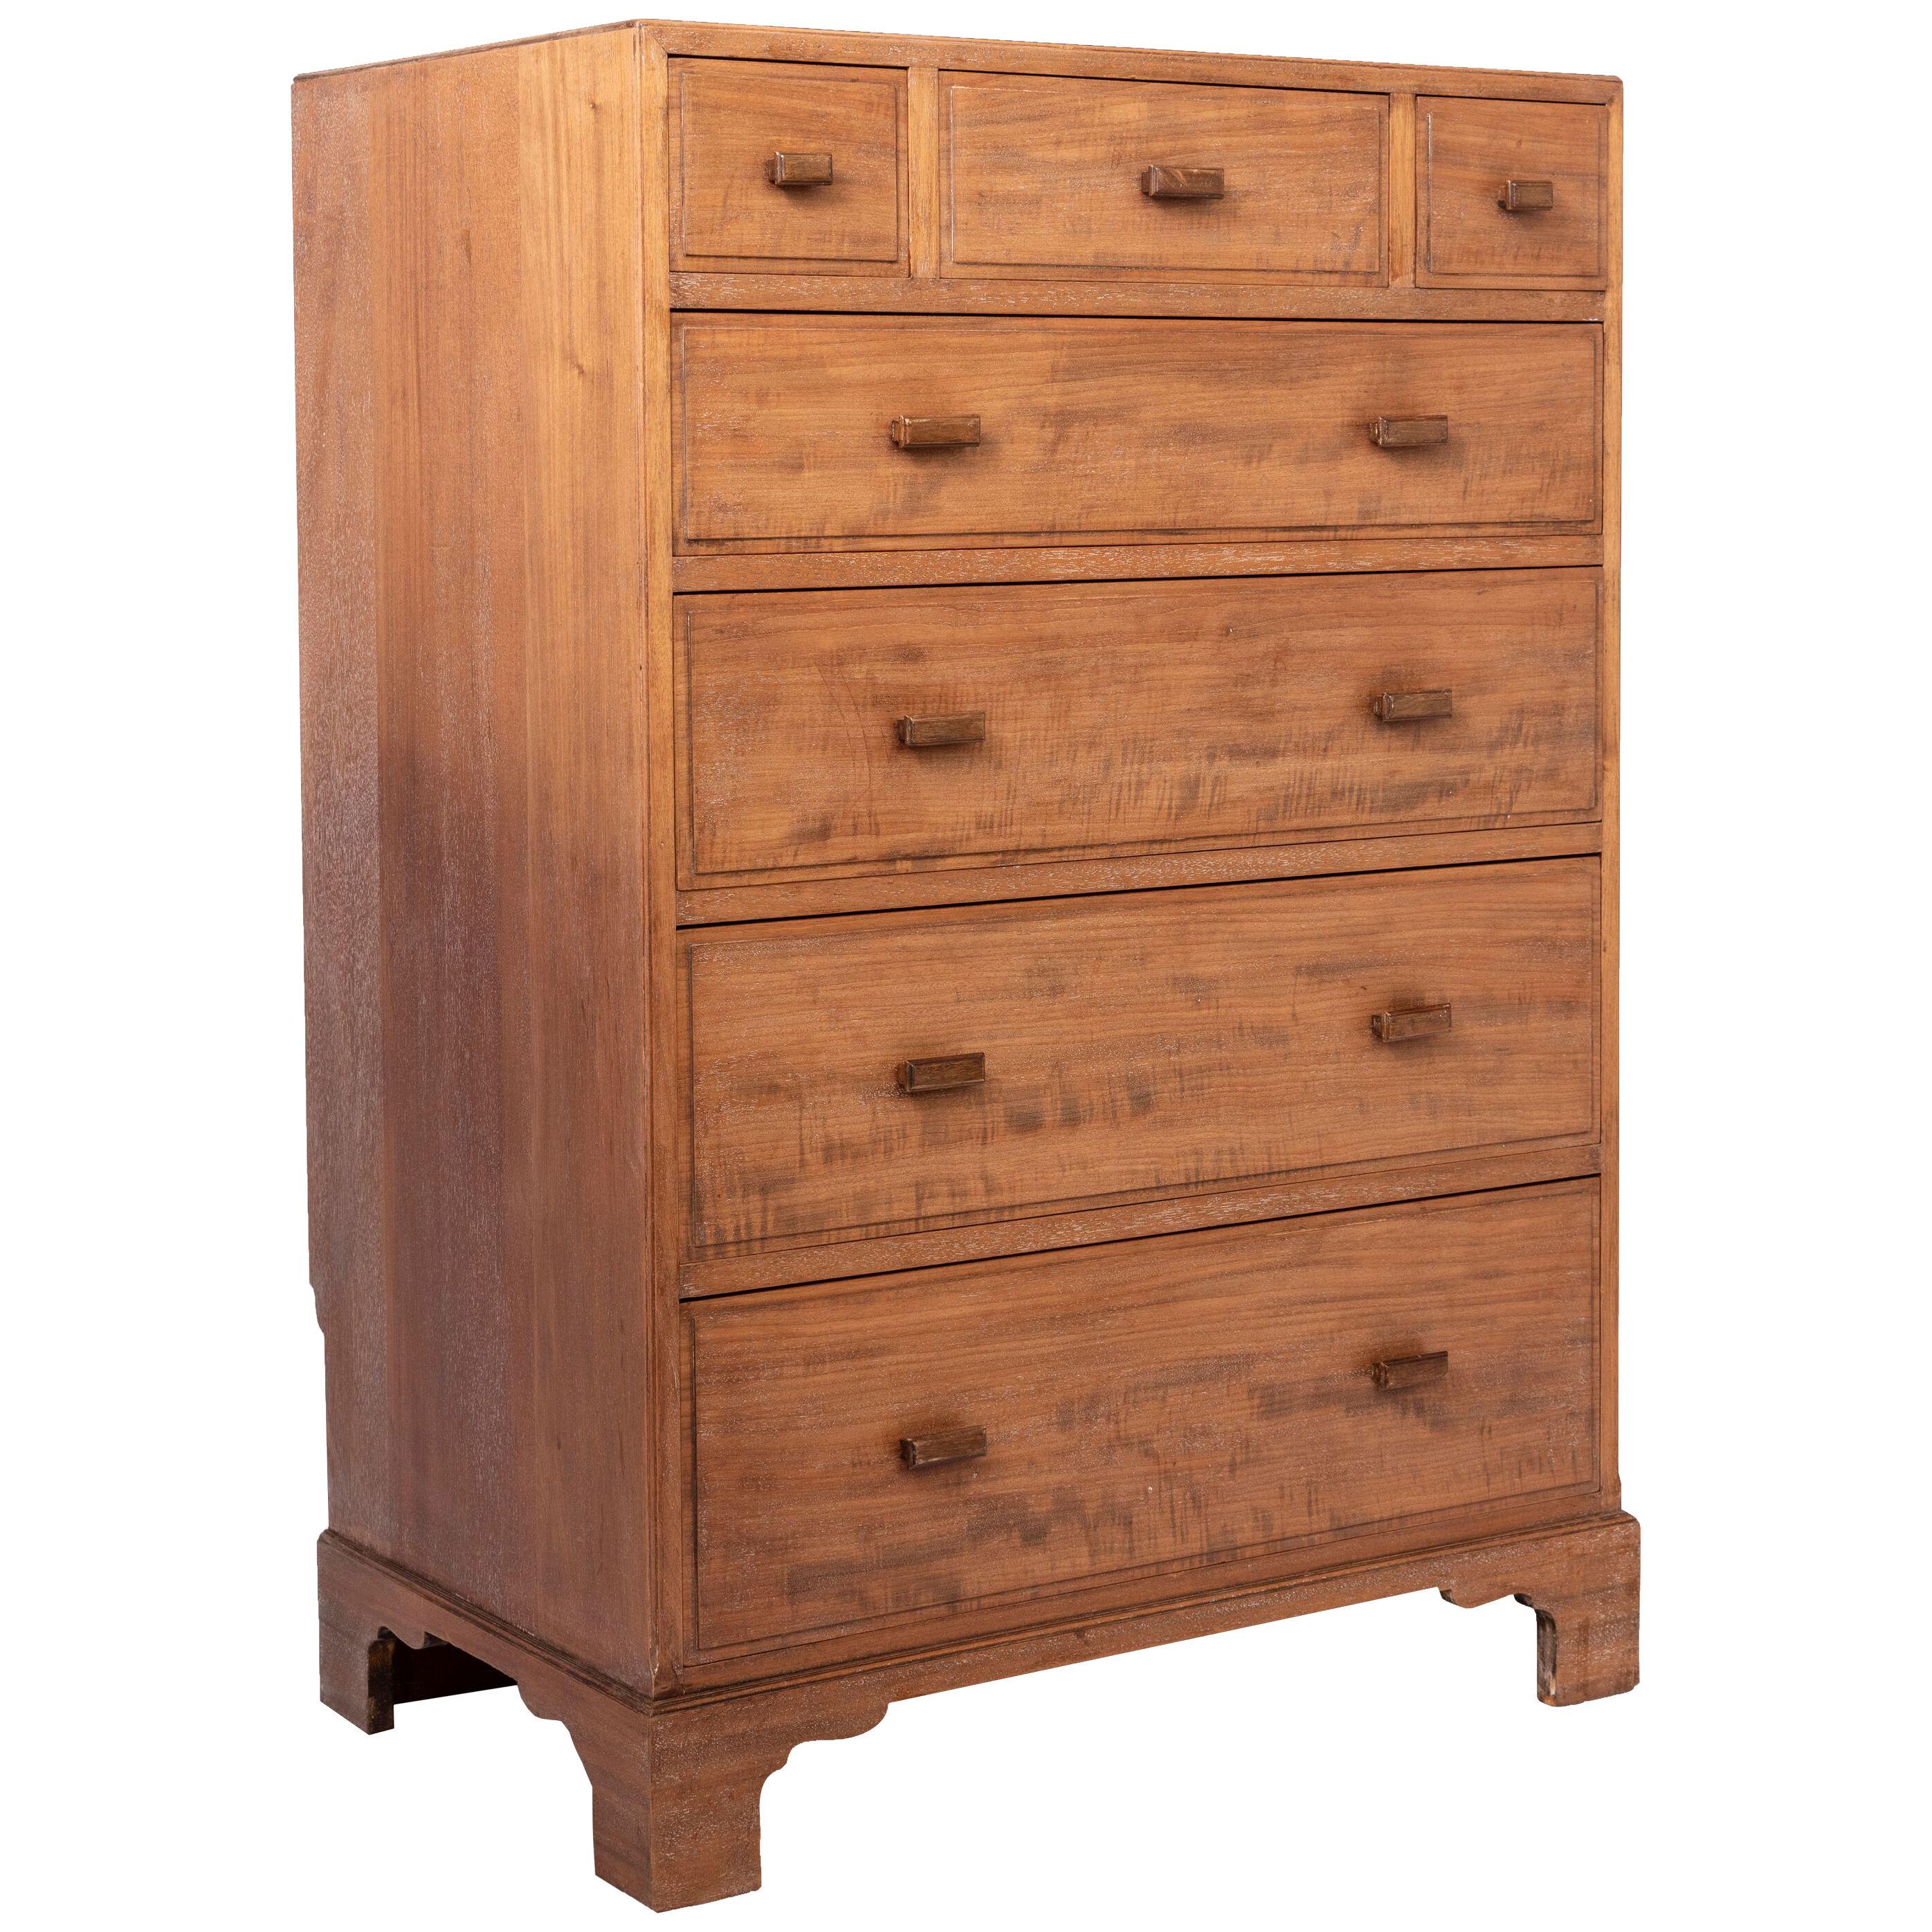 Heal & Son walnut tall chest of drawers, England circa 1920